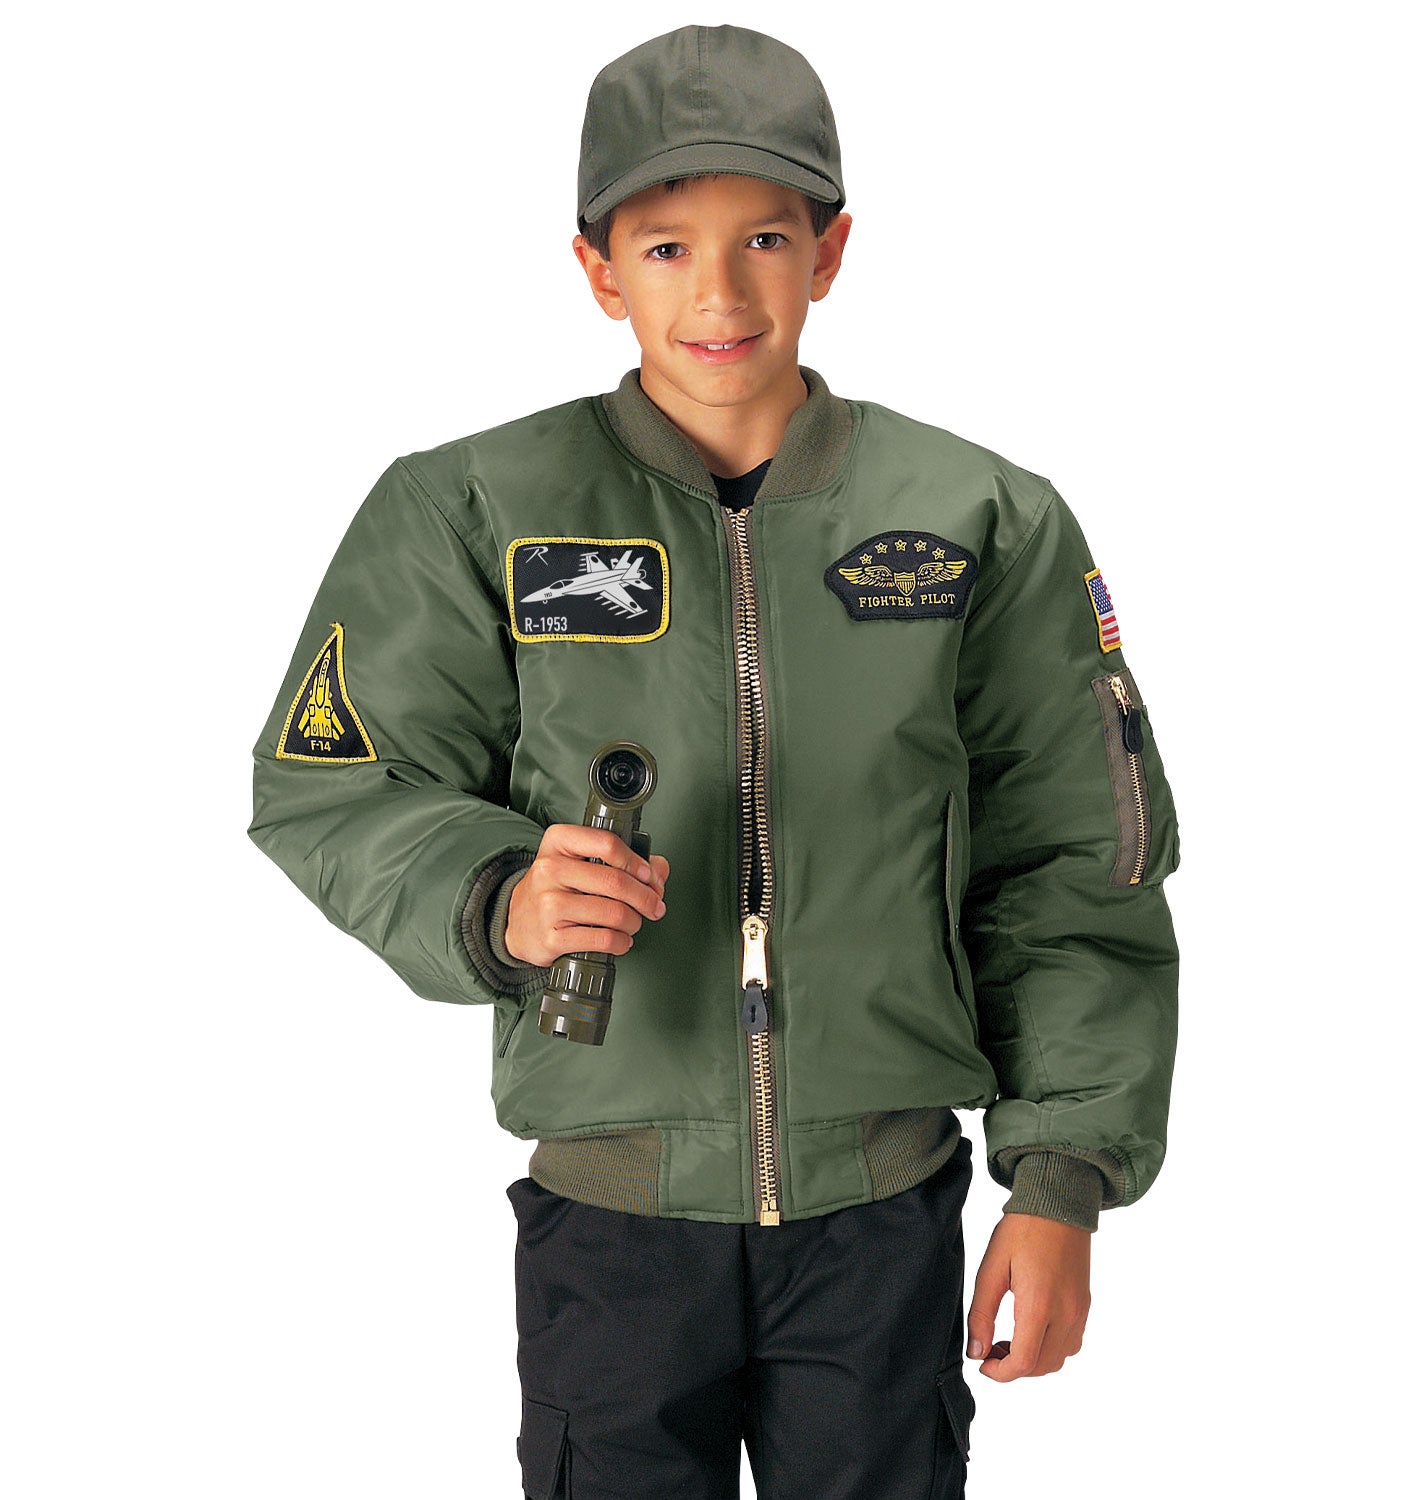 Rothco Kids Flight Jacket MA-1 Bomber Jacket With Patches